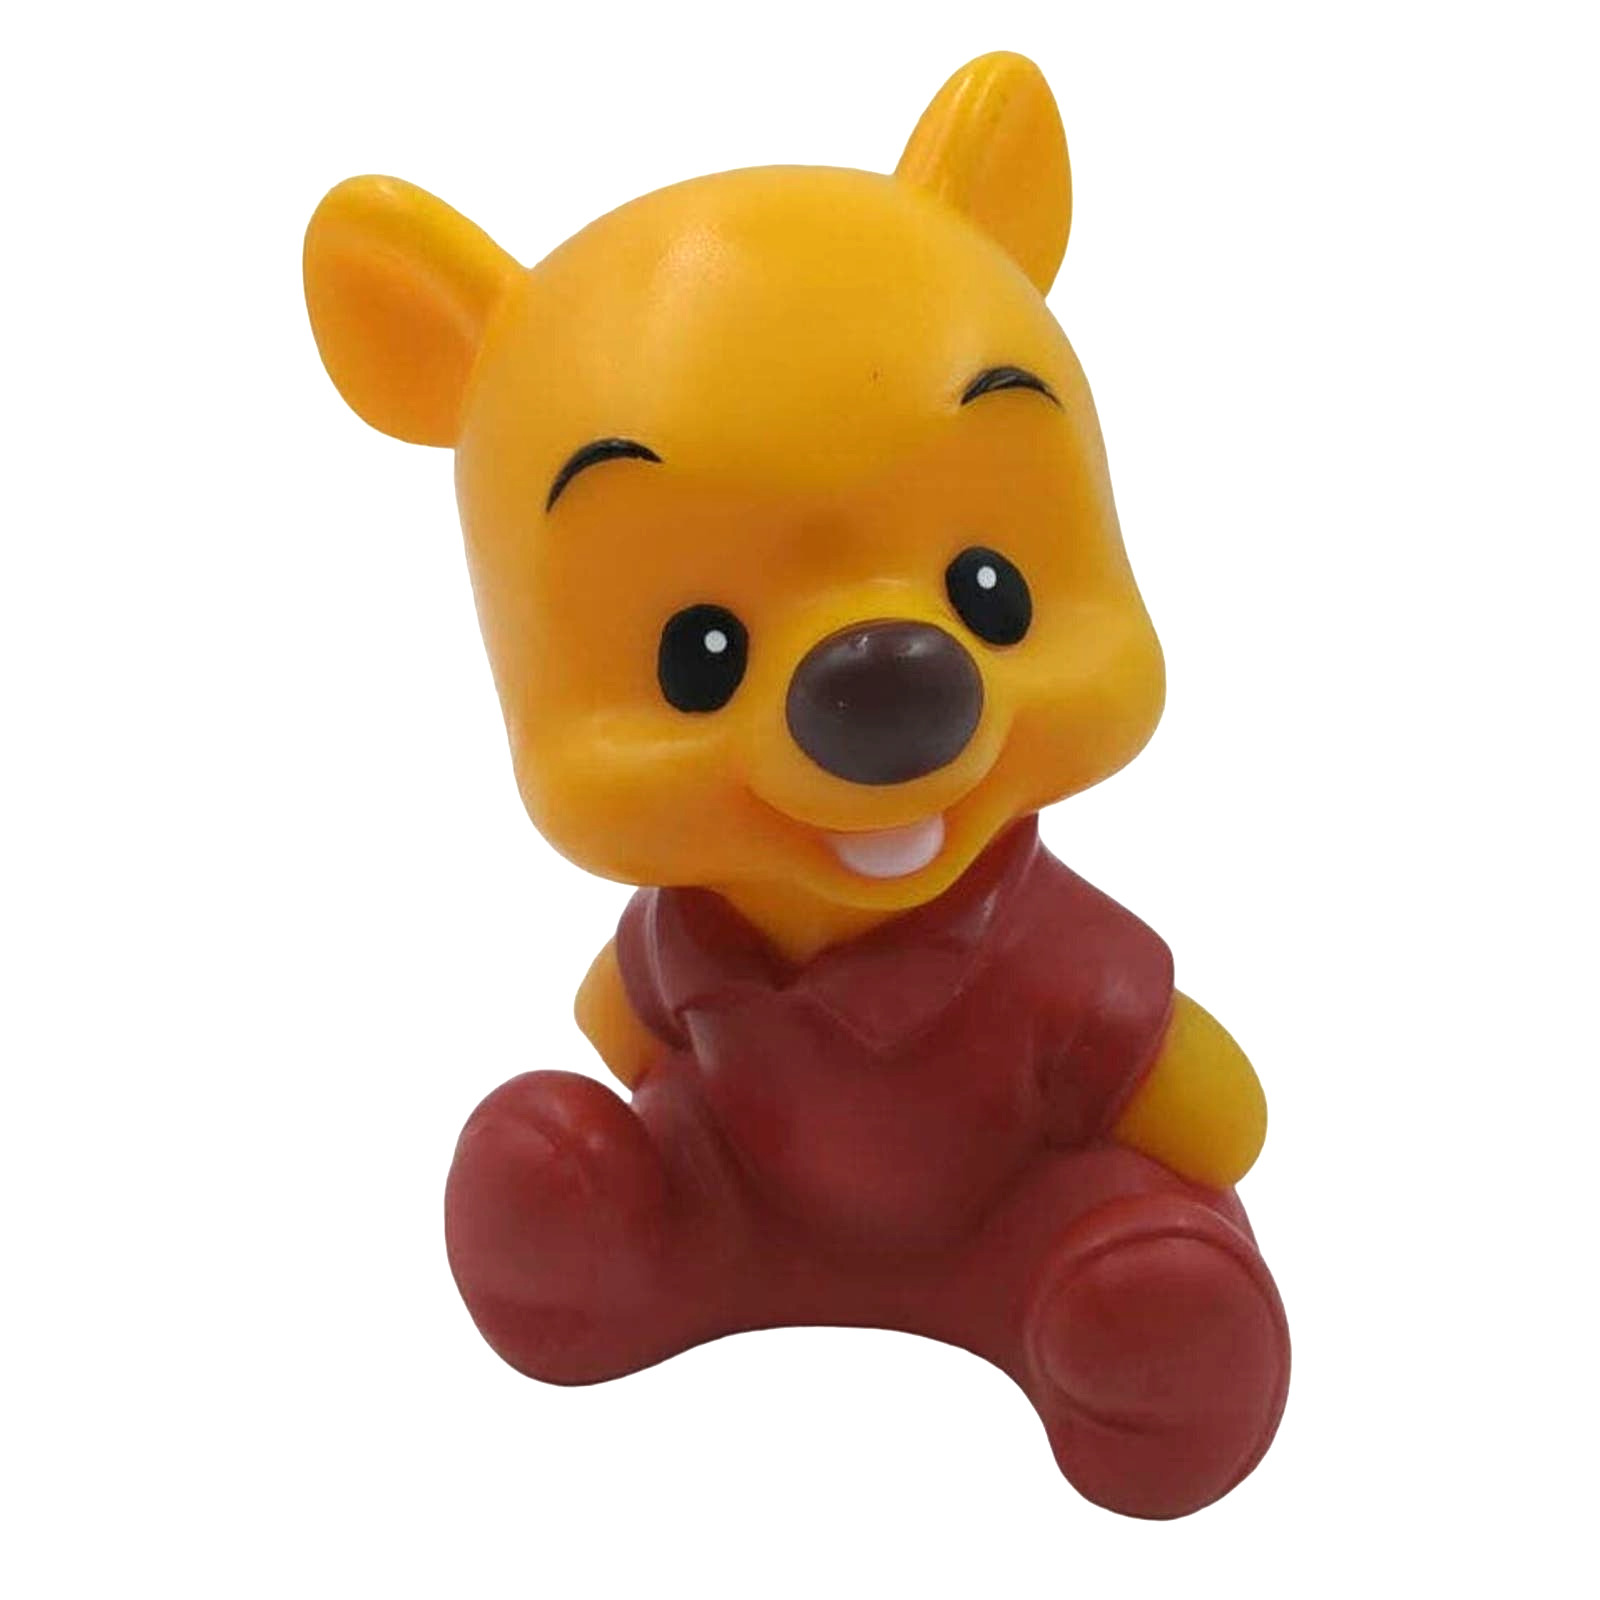 Vintage Disney Baby Winnie The Pooh Piggy 6.5” Bank Yellow Red Hard Plastic Coin